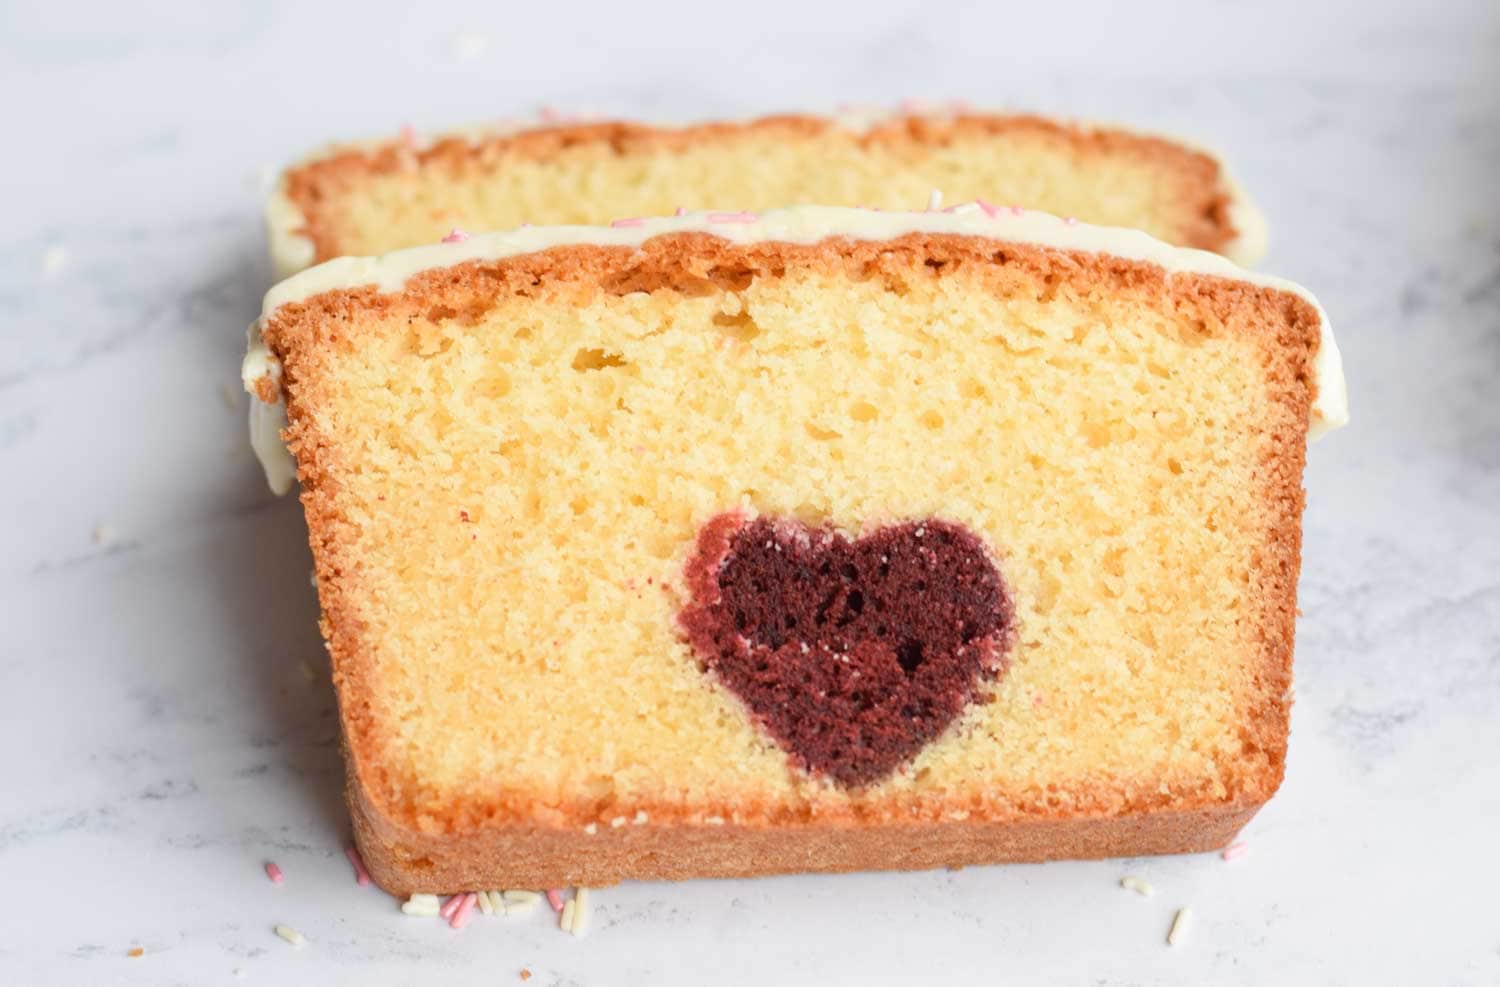 Two slices of gluten-free cake with a heart inside